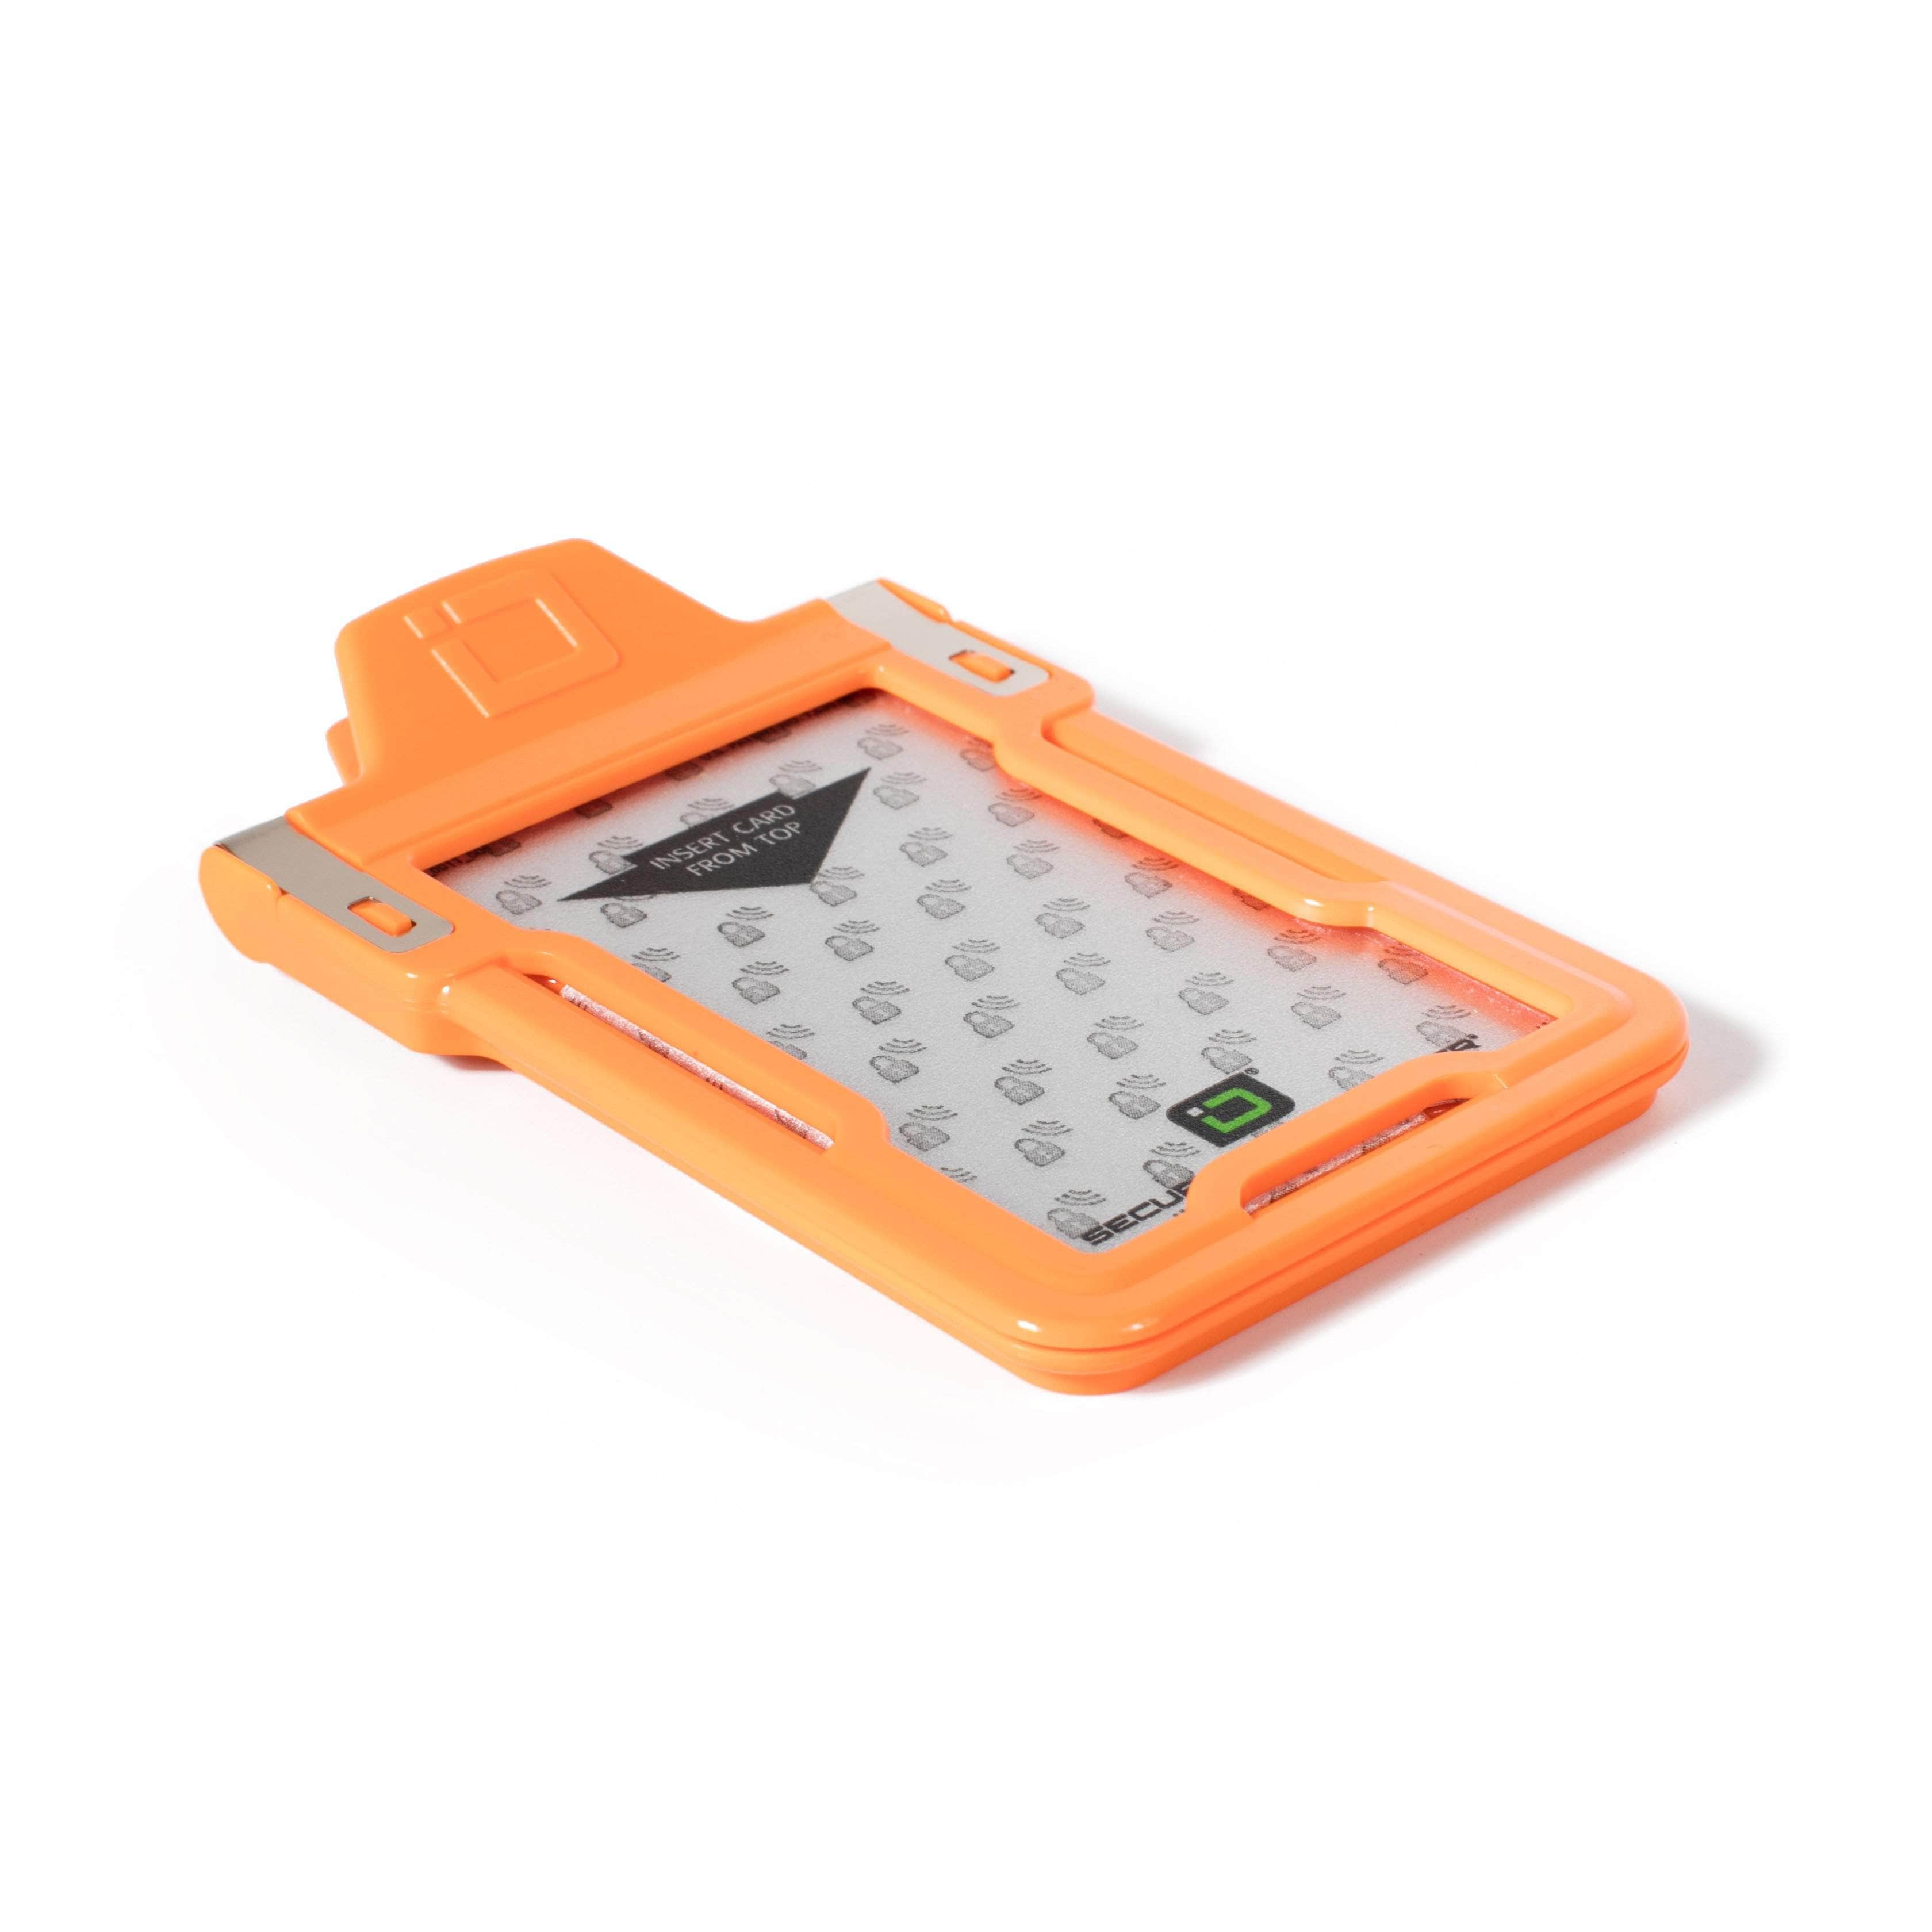 ID Stronghold Badgeholder BloxProx Secure Badge Holder with BloxProx™ - Protects 125Khz HID Prox 1 Card Holder